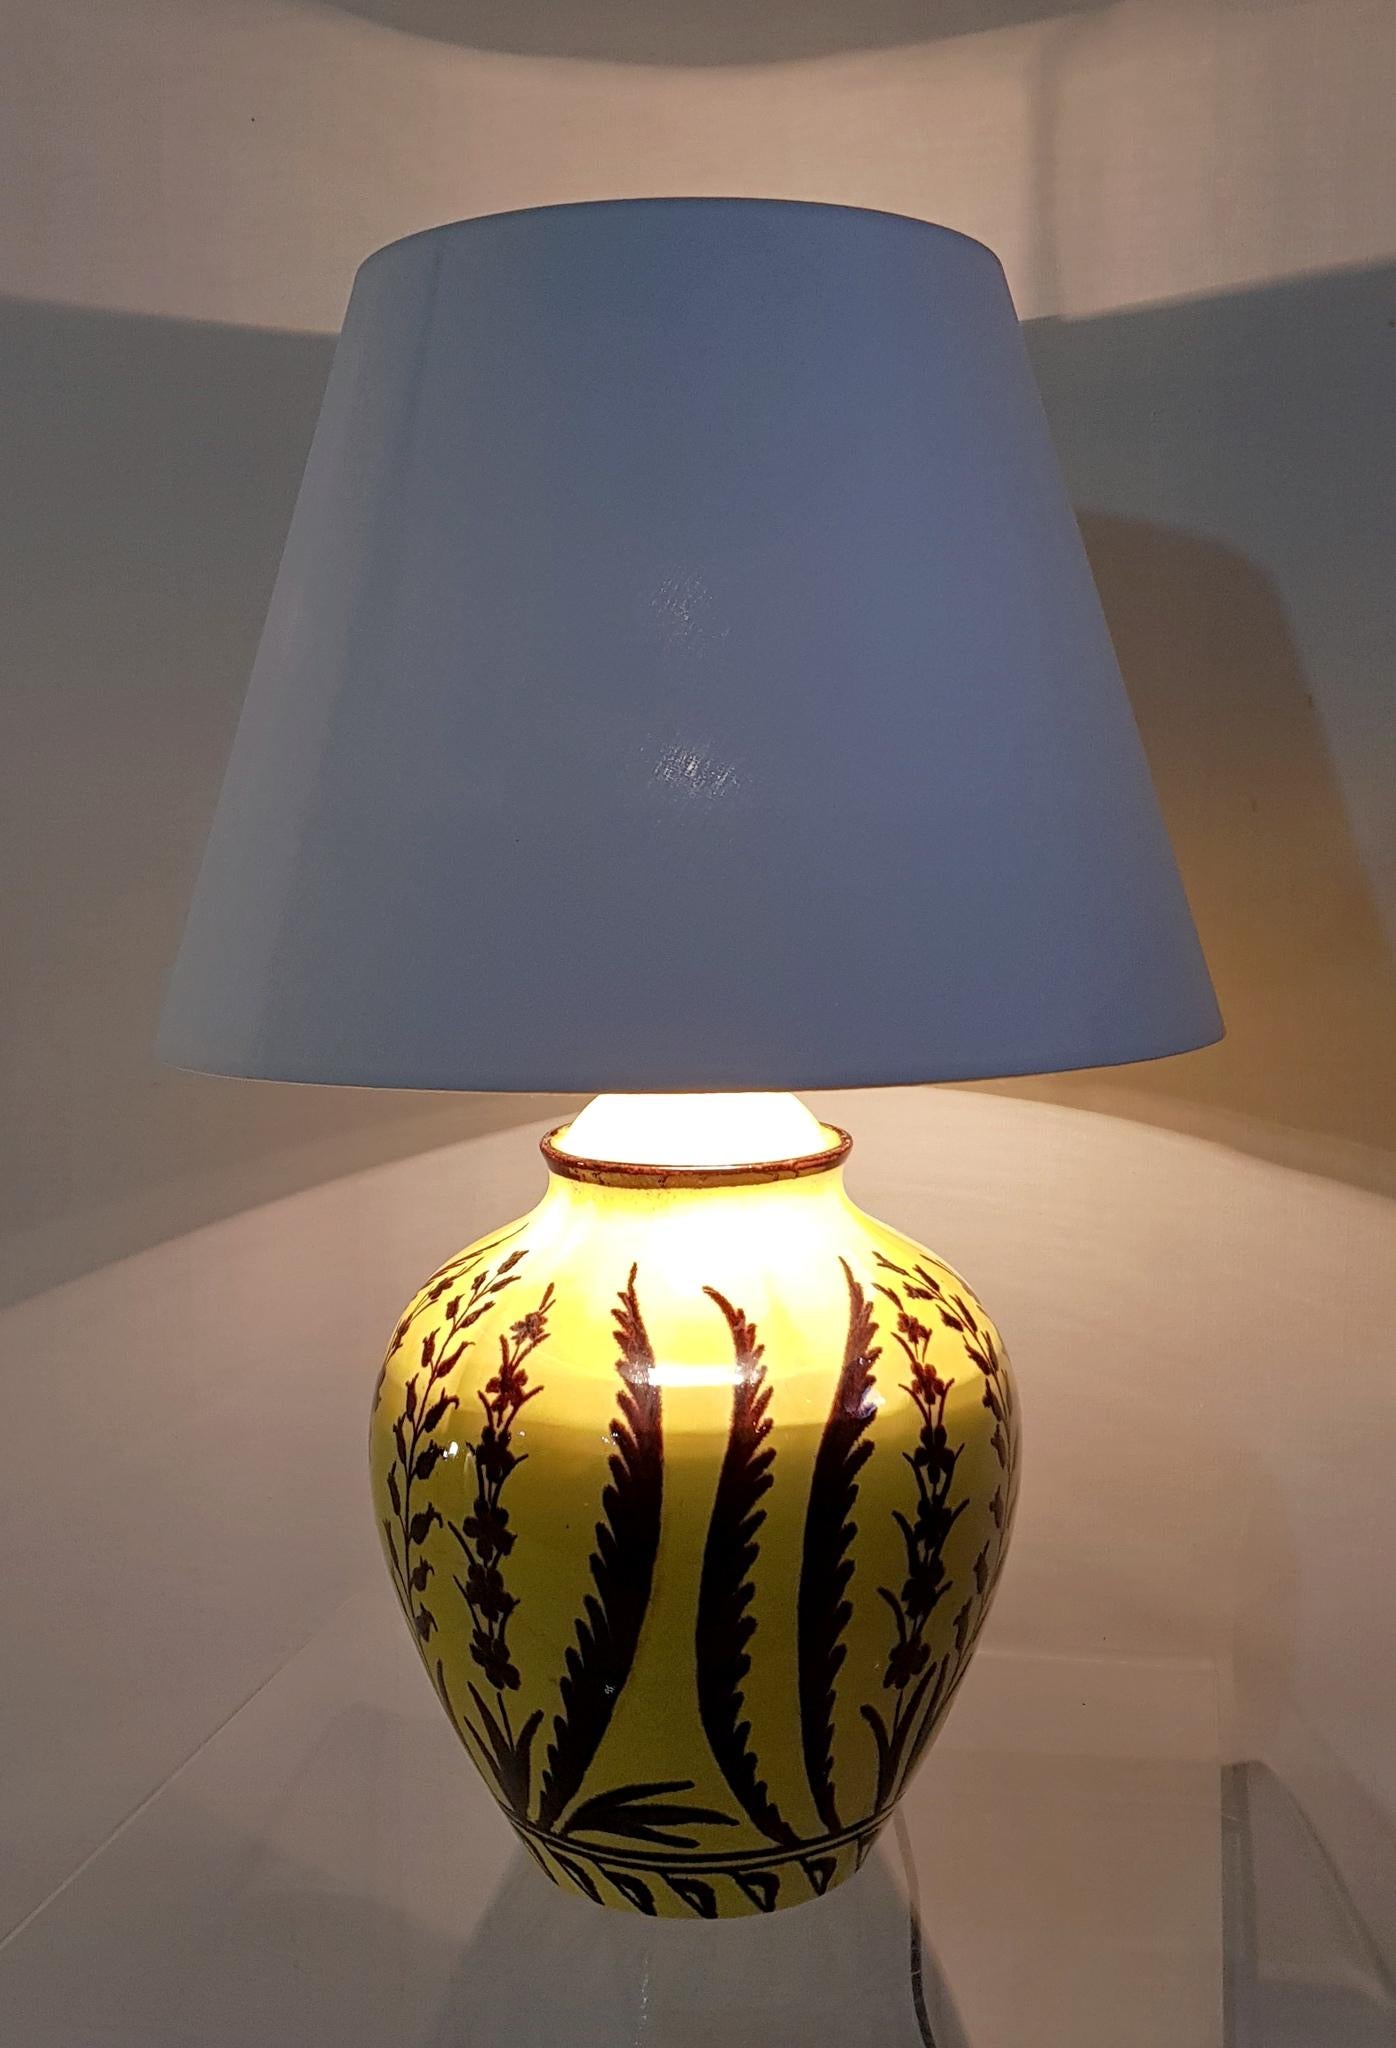 This lamp was handmade in Italy during the 1950s. It is marked at the base with a number and the production year (1957). It has a yellow base painted with different plants. In perfect condition and comes with a white lampshade.